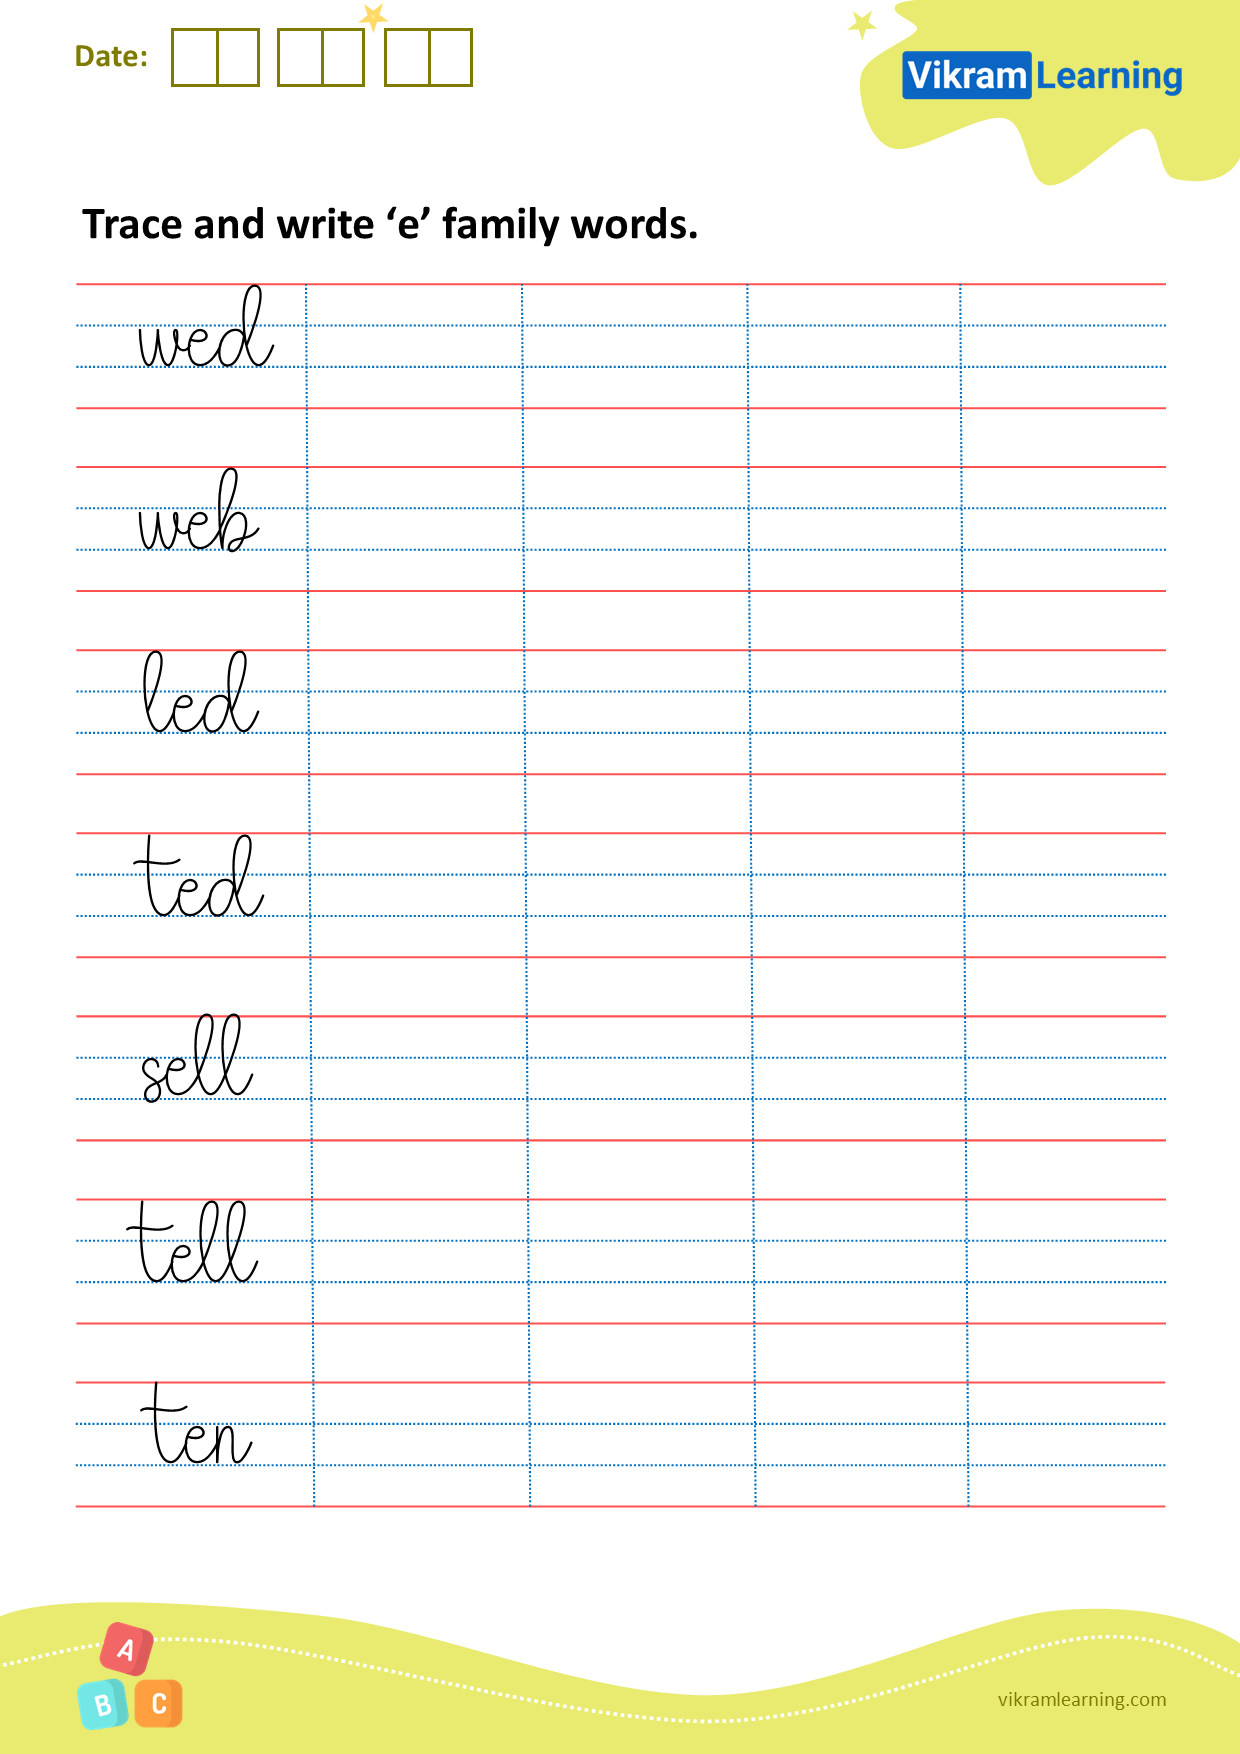 Download trace and write ‘e’ family words worksheets